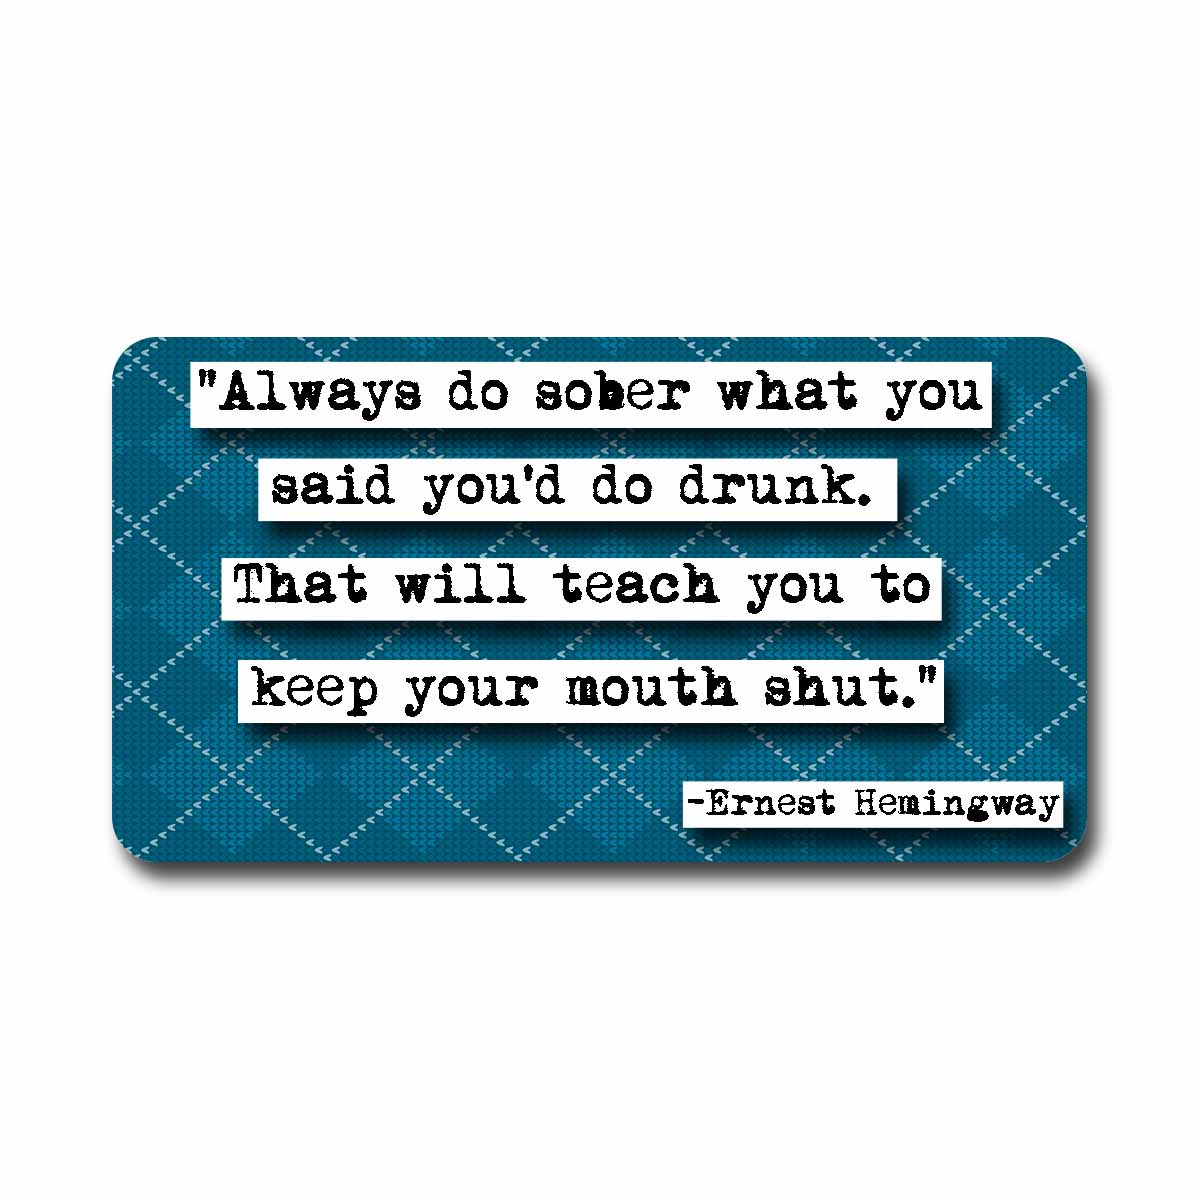 Food and Drink Pocket Wisdom Mini Quote Cards Set of 12